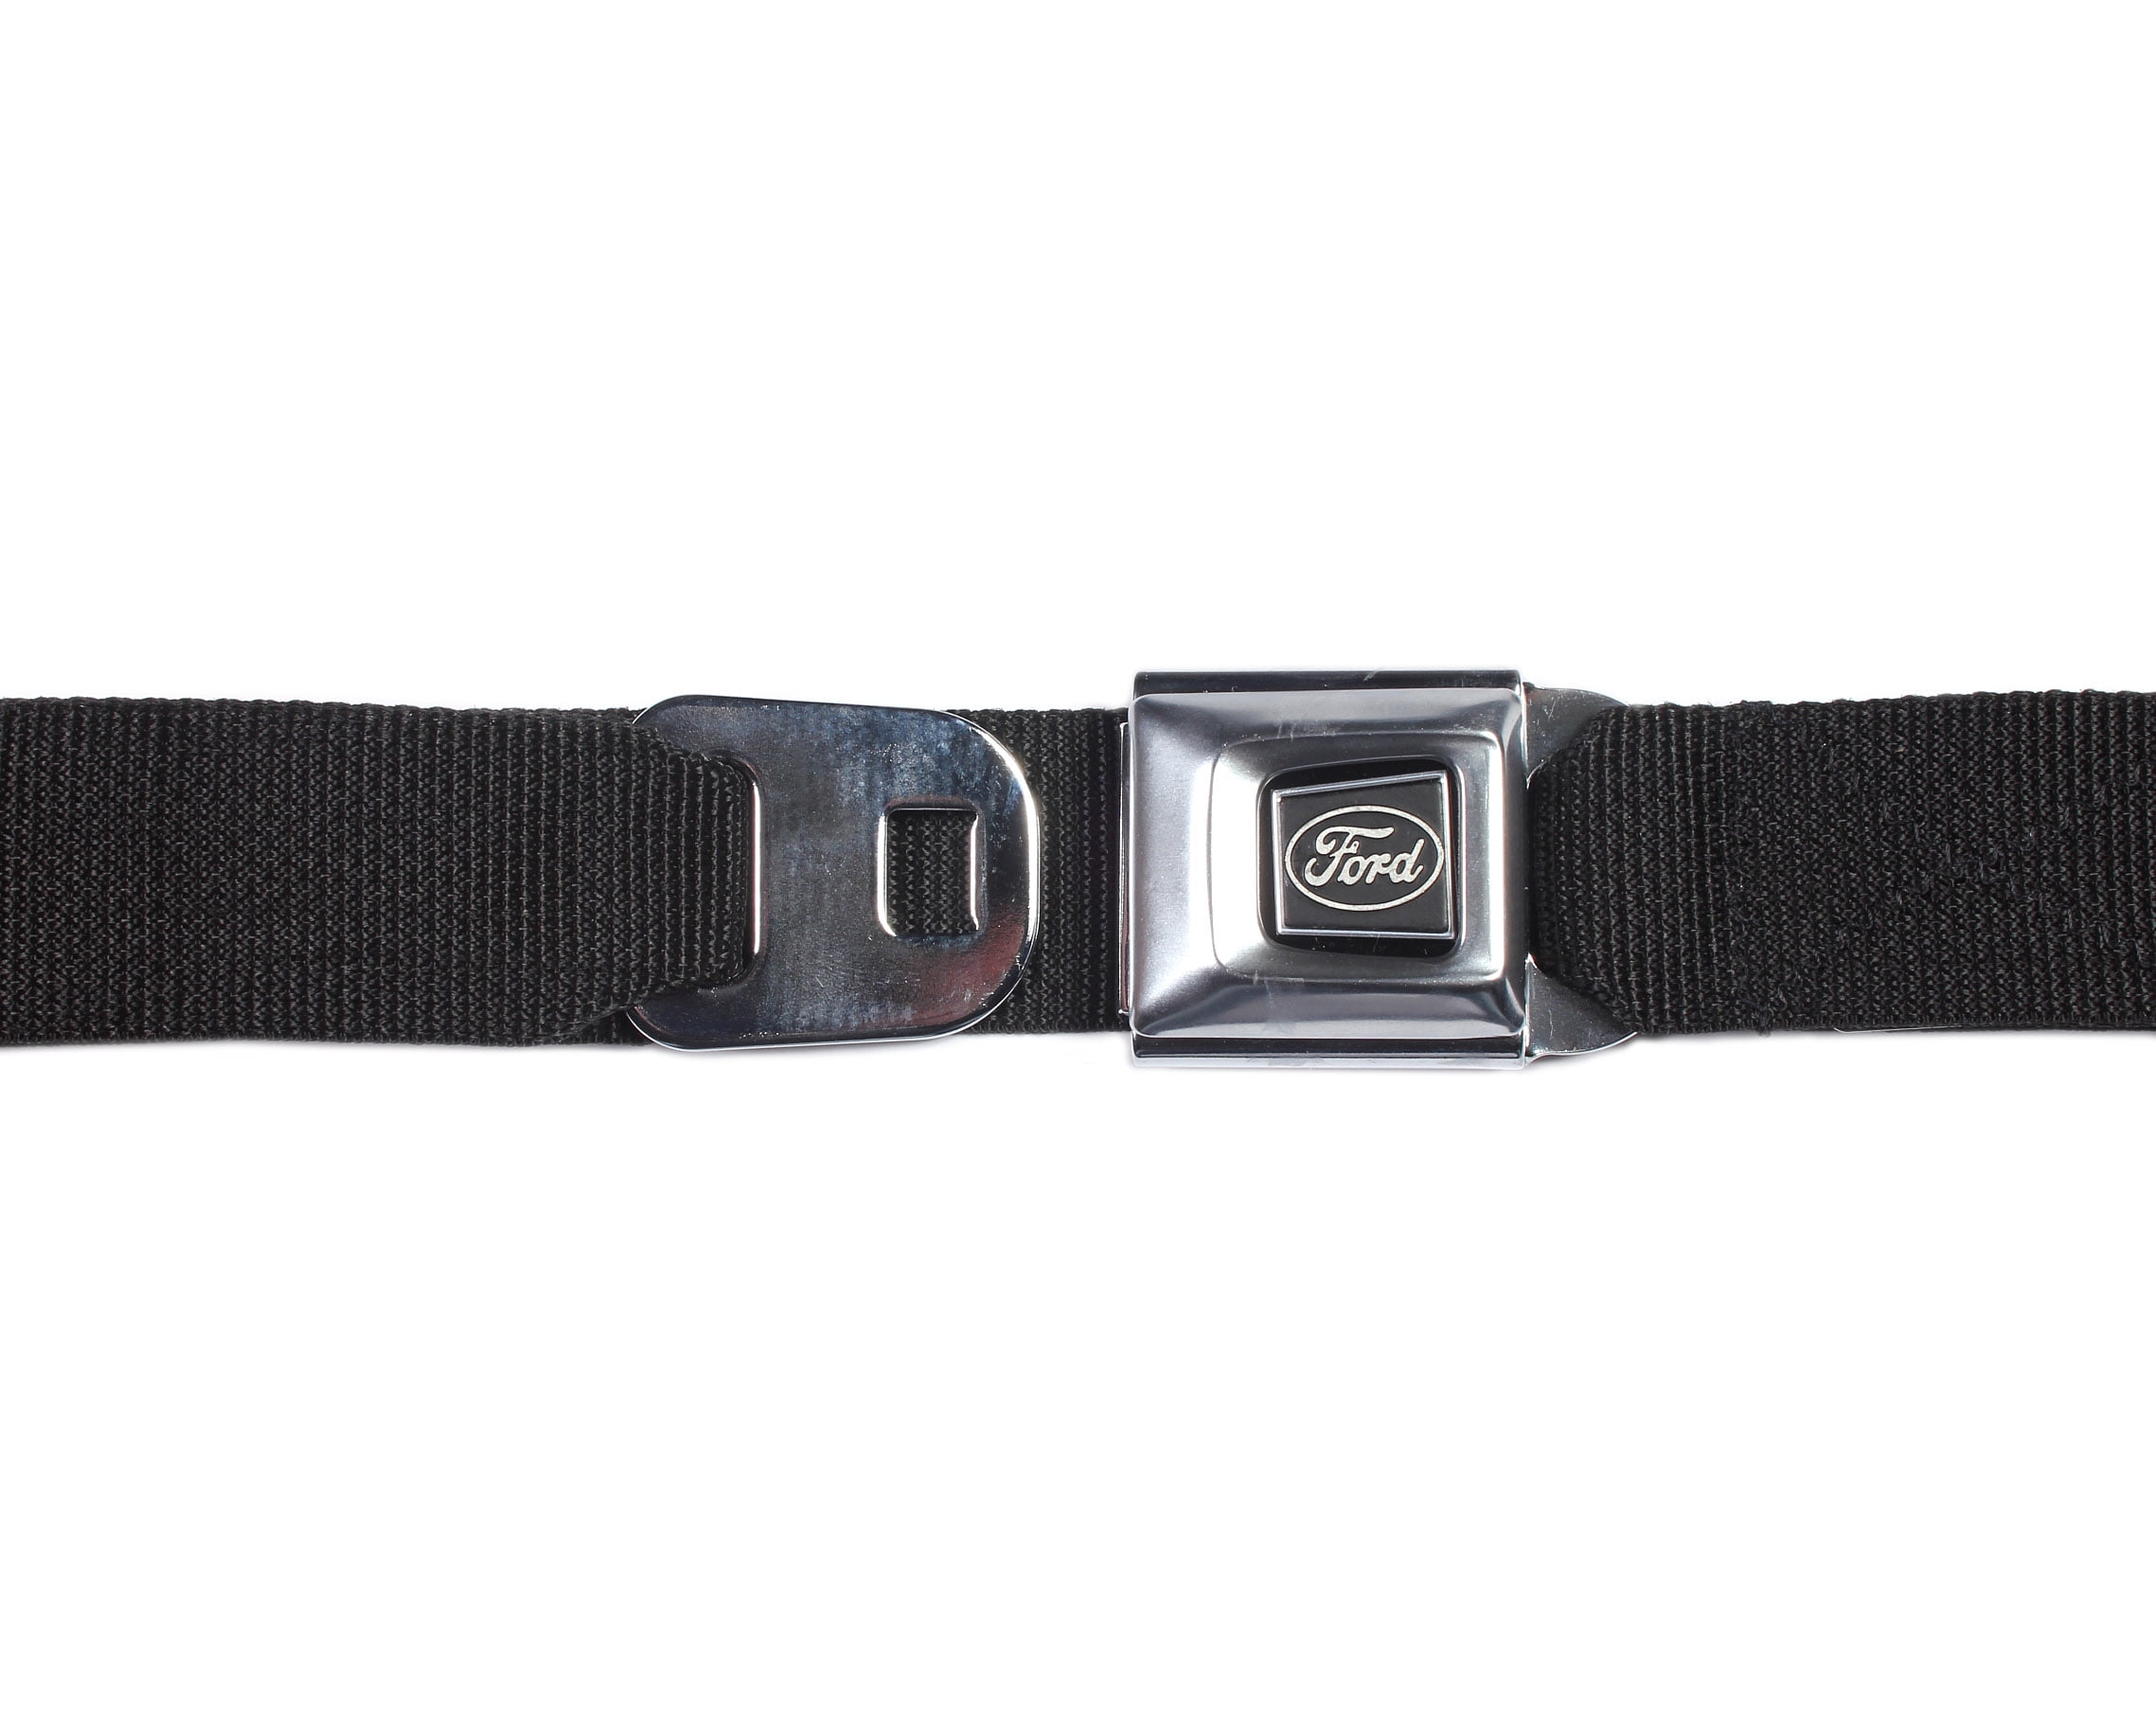 Buckle-Down Unisex-Adults Seatbelt Belt Regular Chicago Skyline/Flag Distressed Black/White/red 1.5 Wide-24-38 Inches